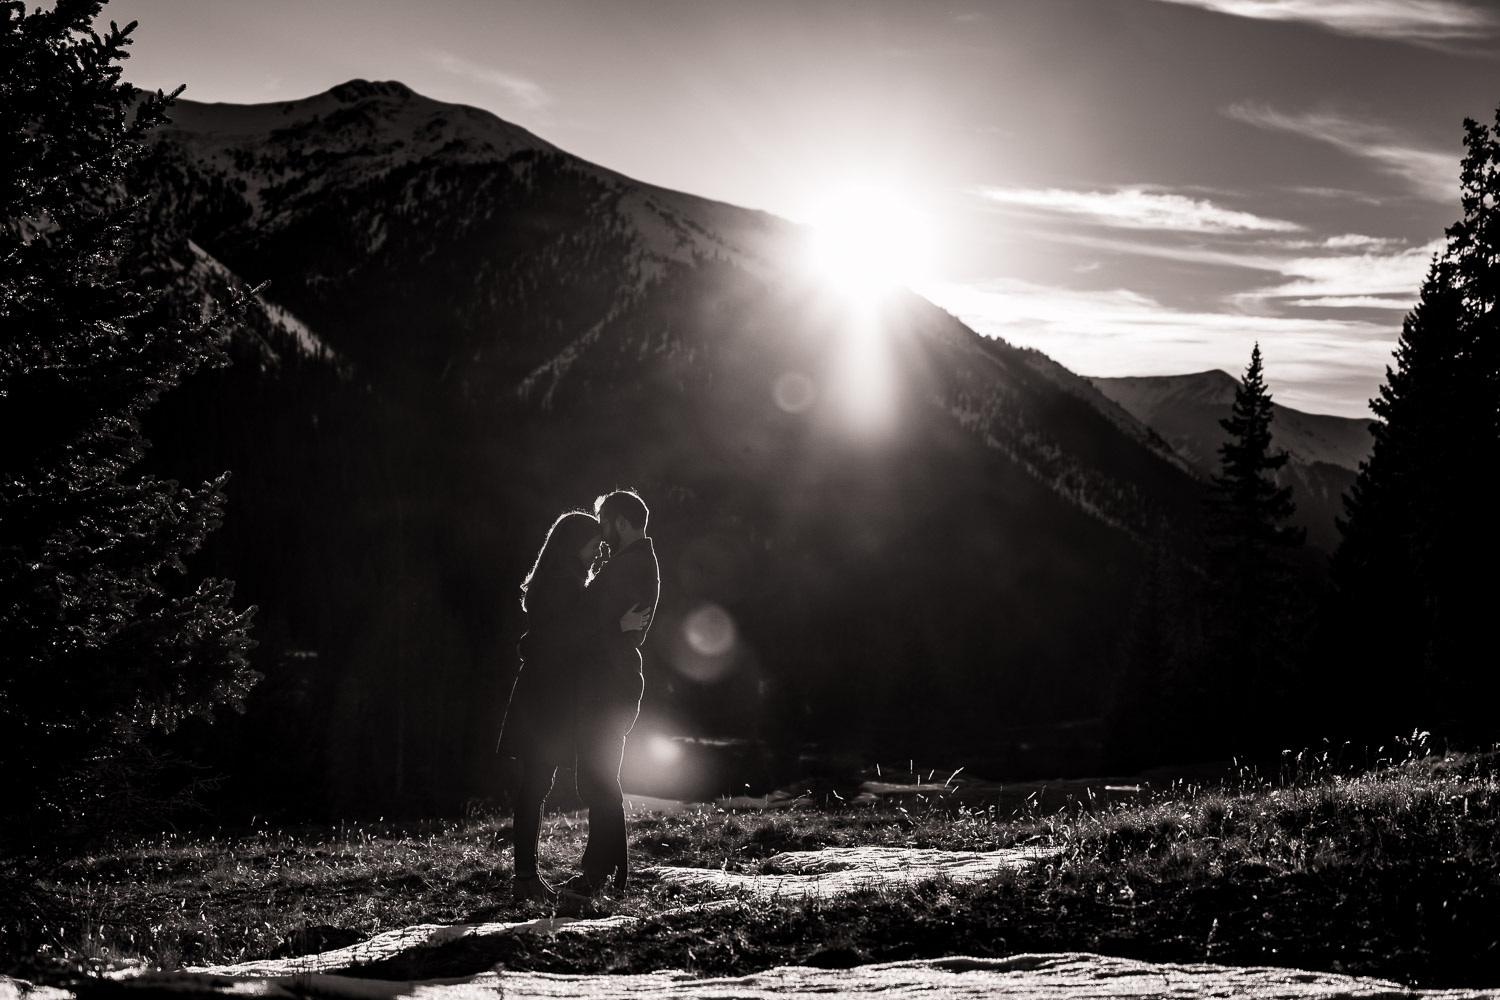 Colorado Mountain Engagement Photos with mountain views and sunset